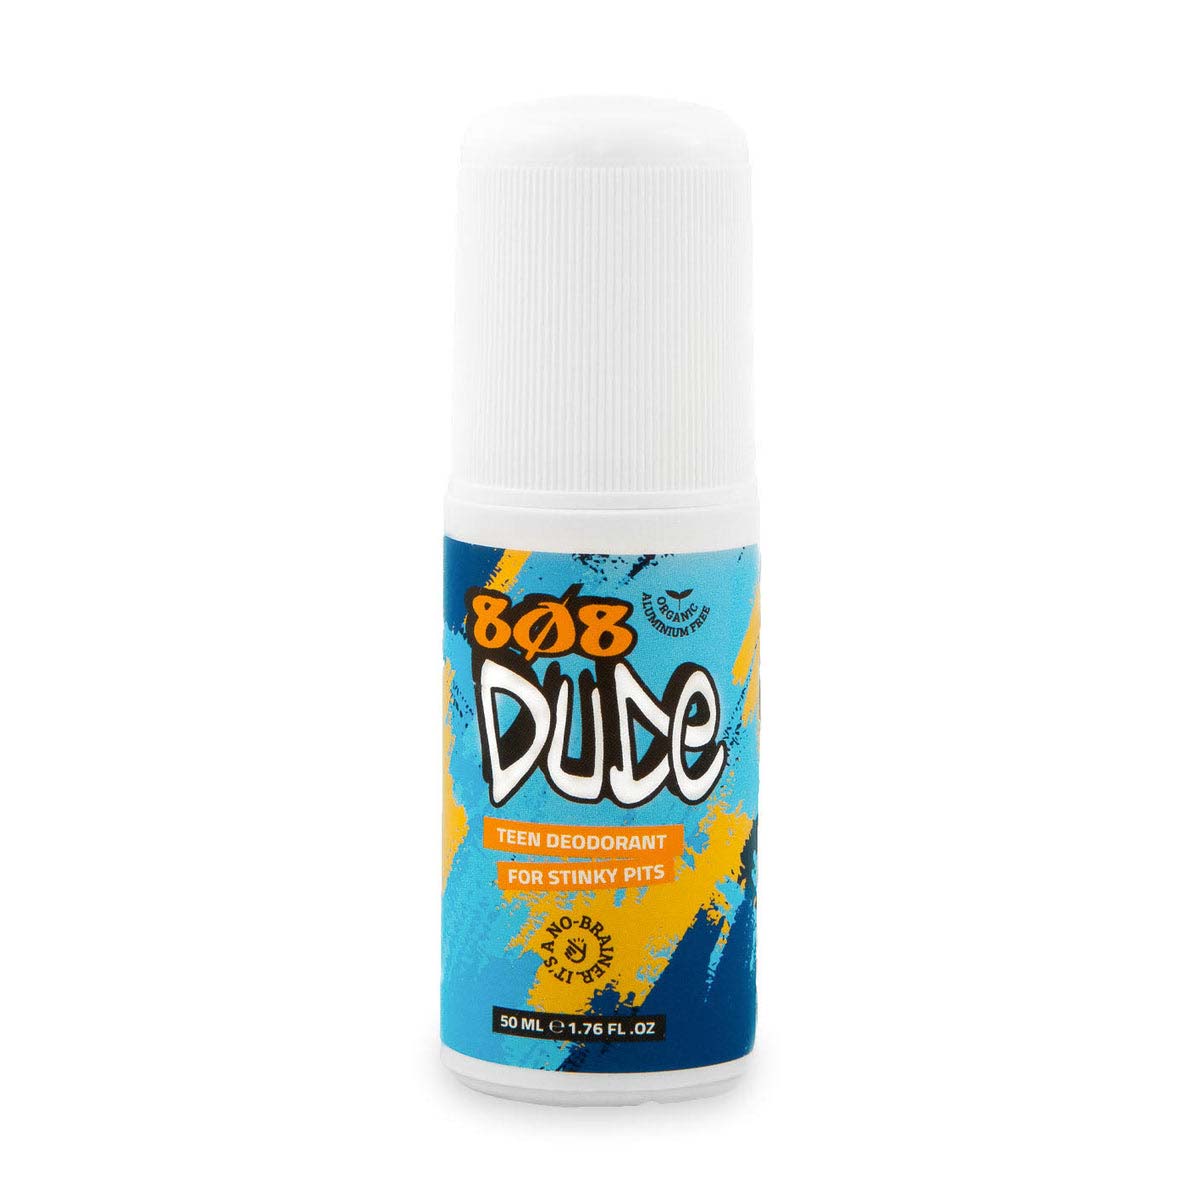 Teen Deodorant for Stinky Pits